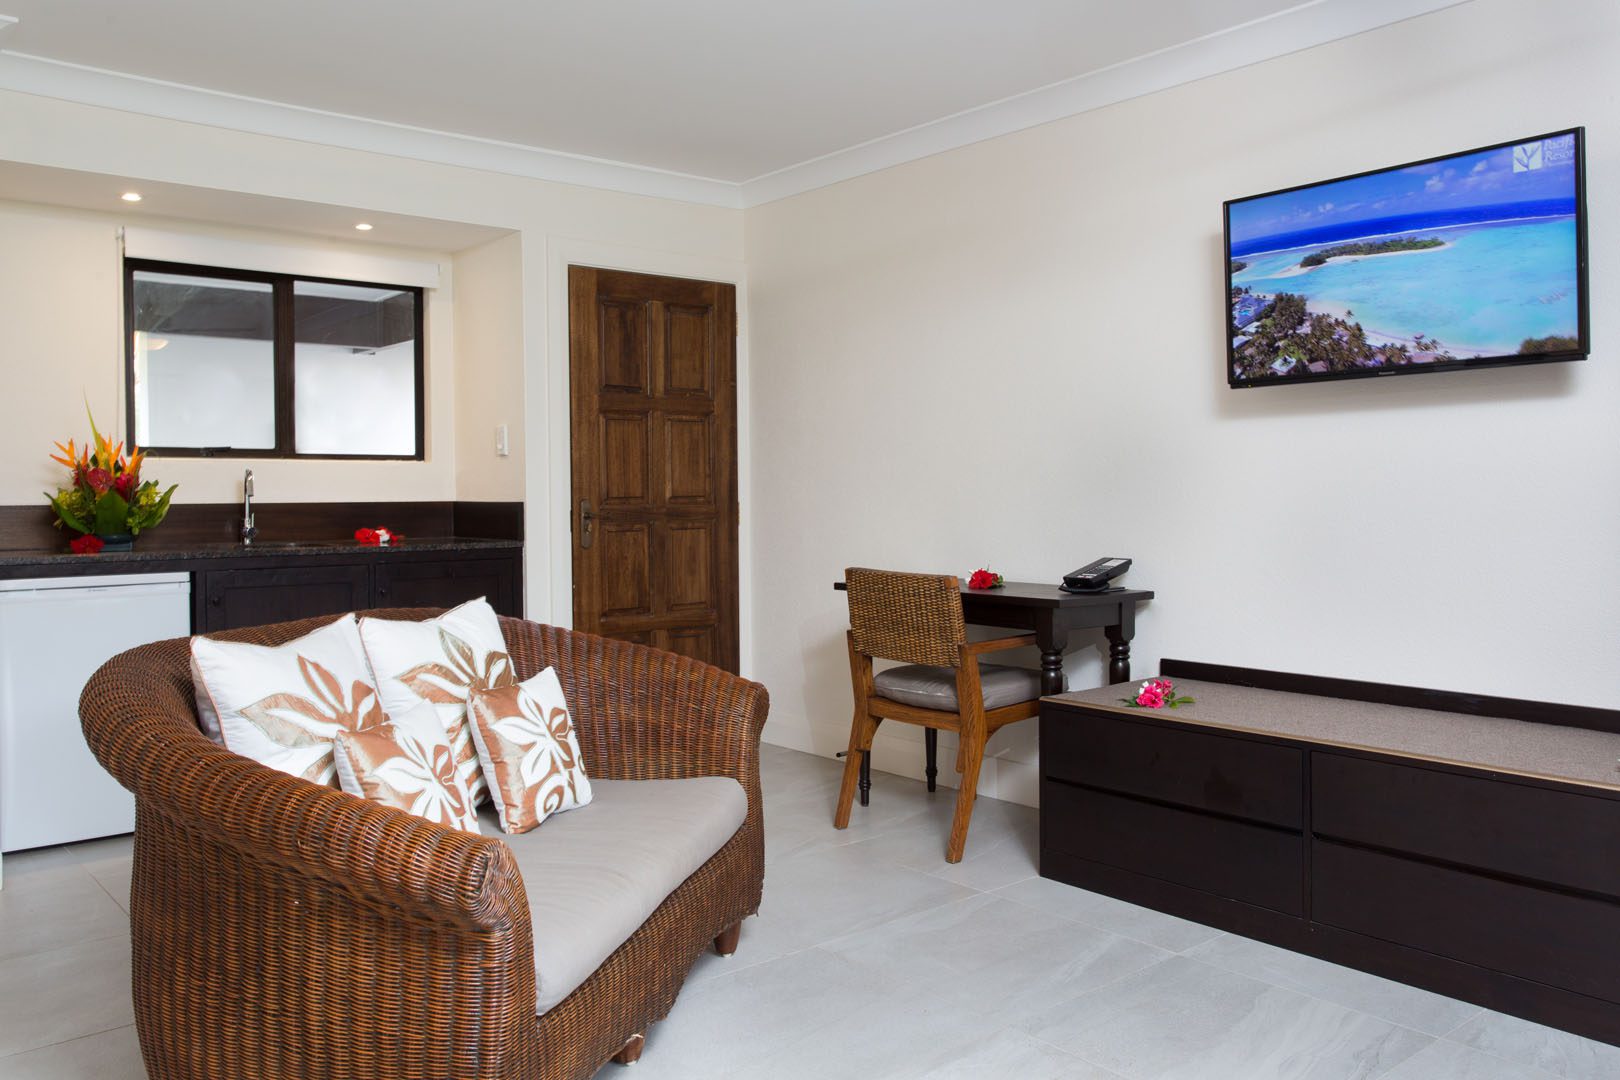 Image of a newly refurbished Standard Studio lounge area featuring a flat TV screen and the in-room attributes